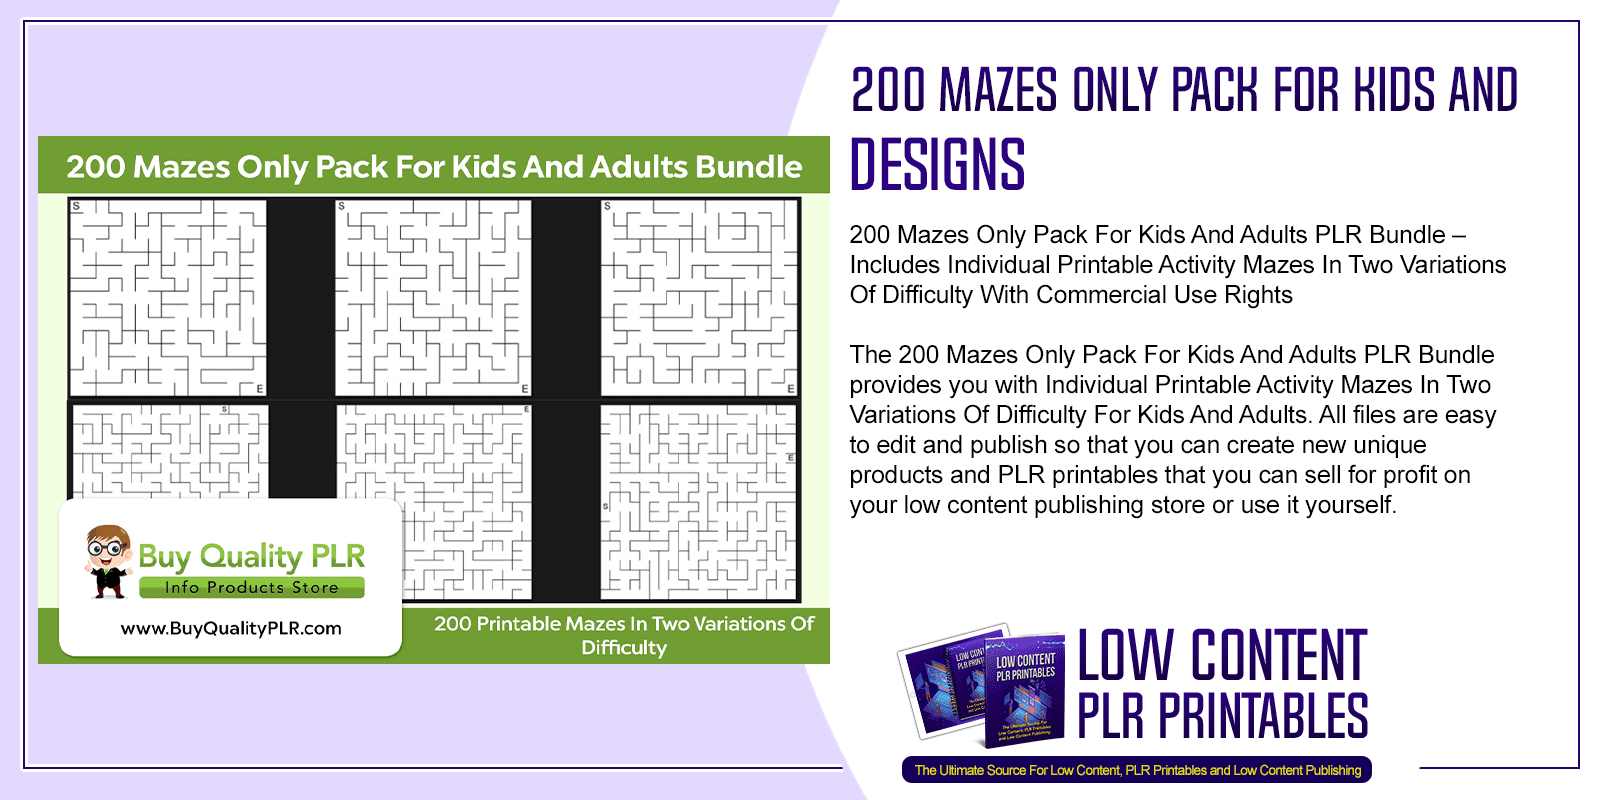 200 Mazes Only Pack For Kids And Adults PLR Bundle